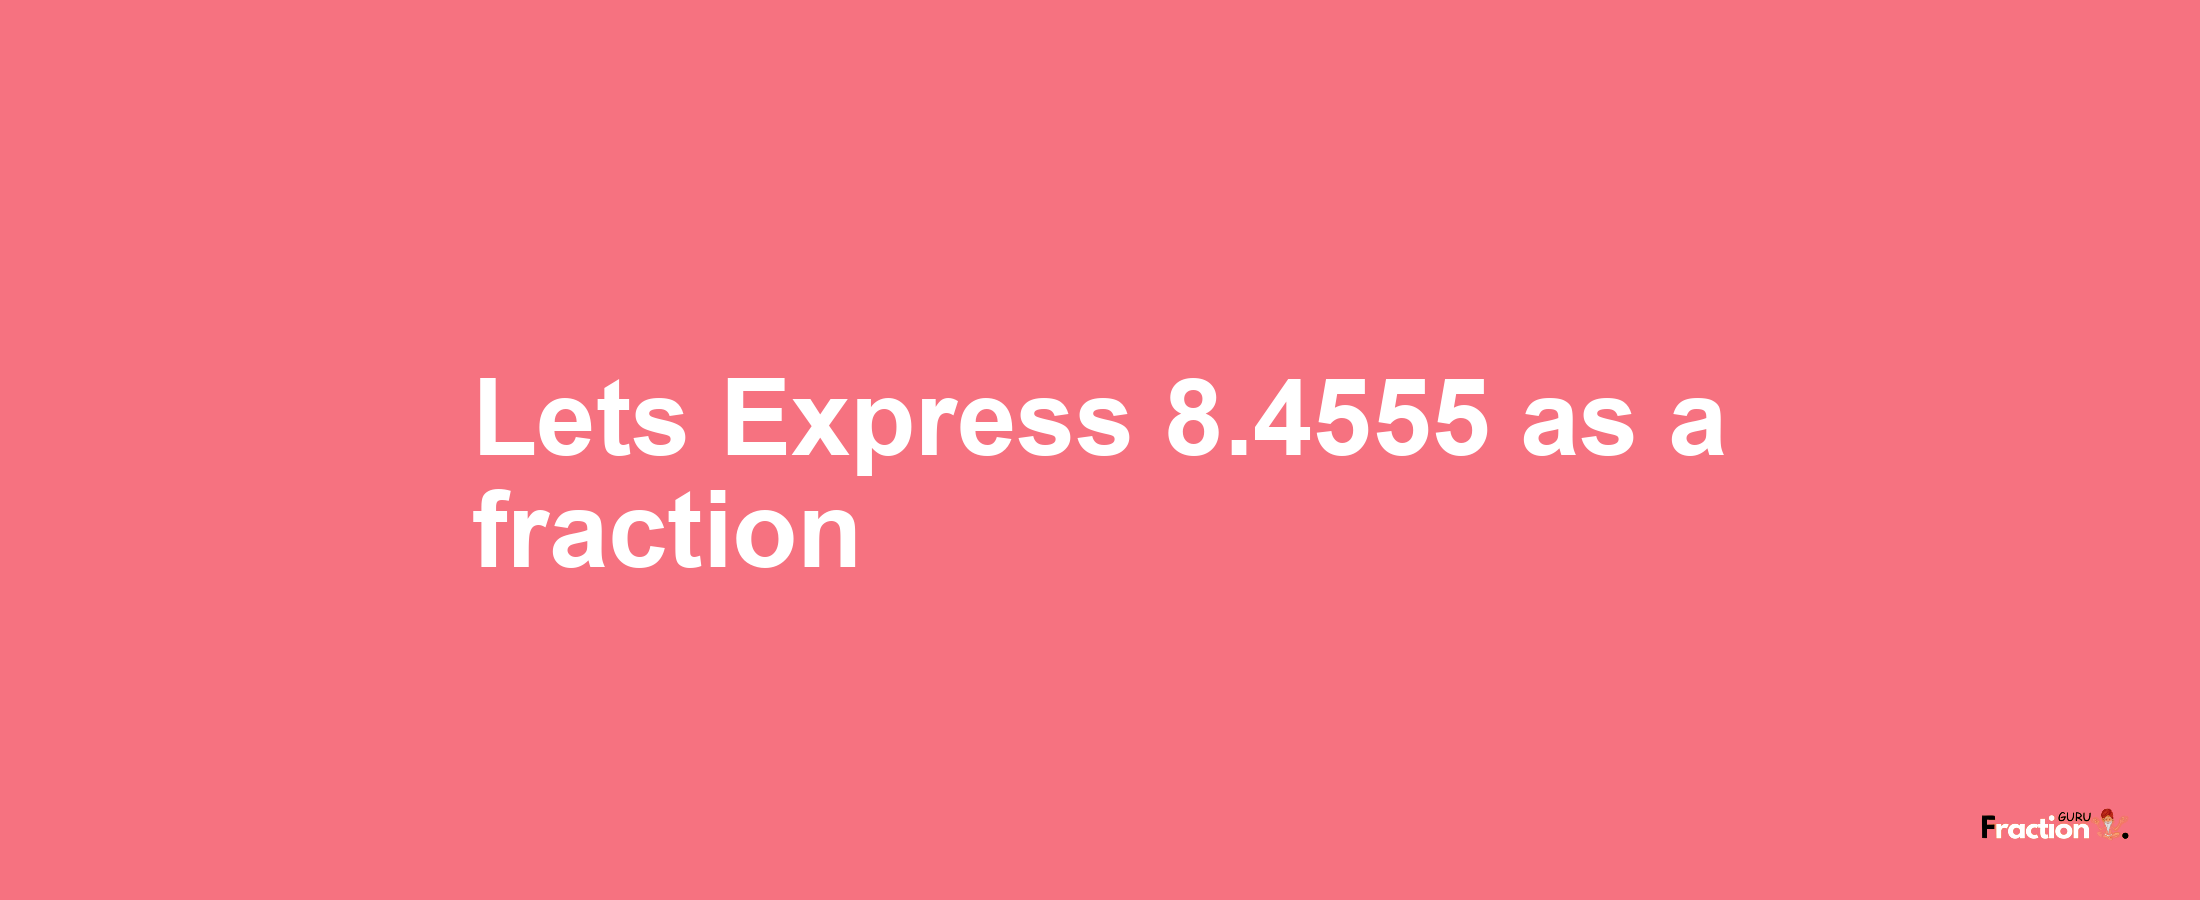 Lets Express 8.4555 as afraction